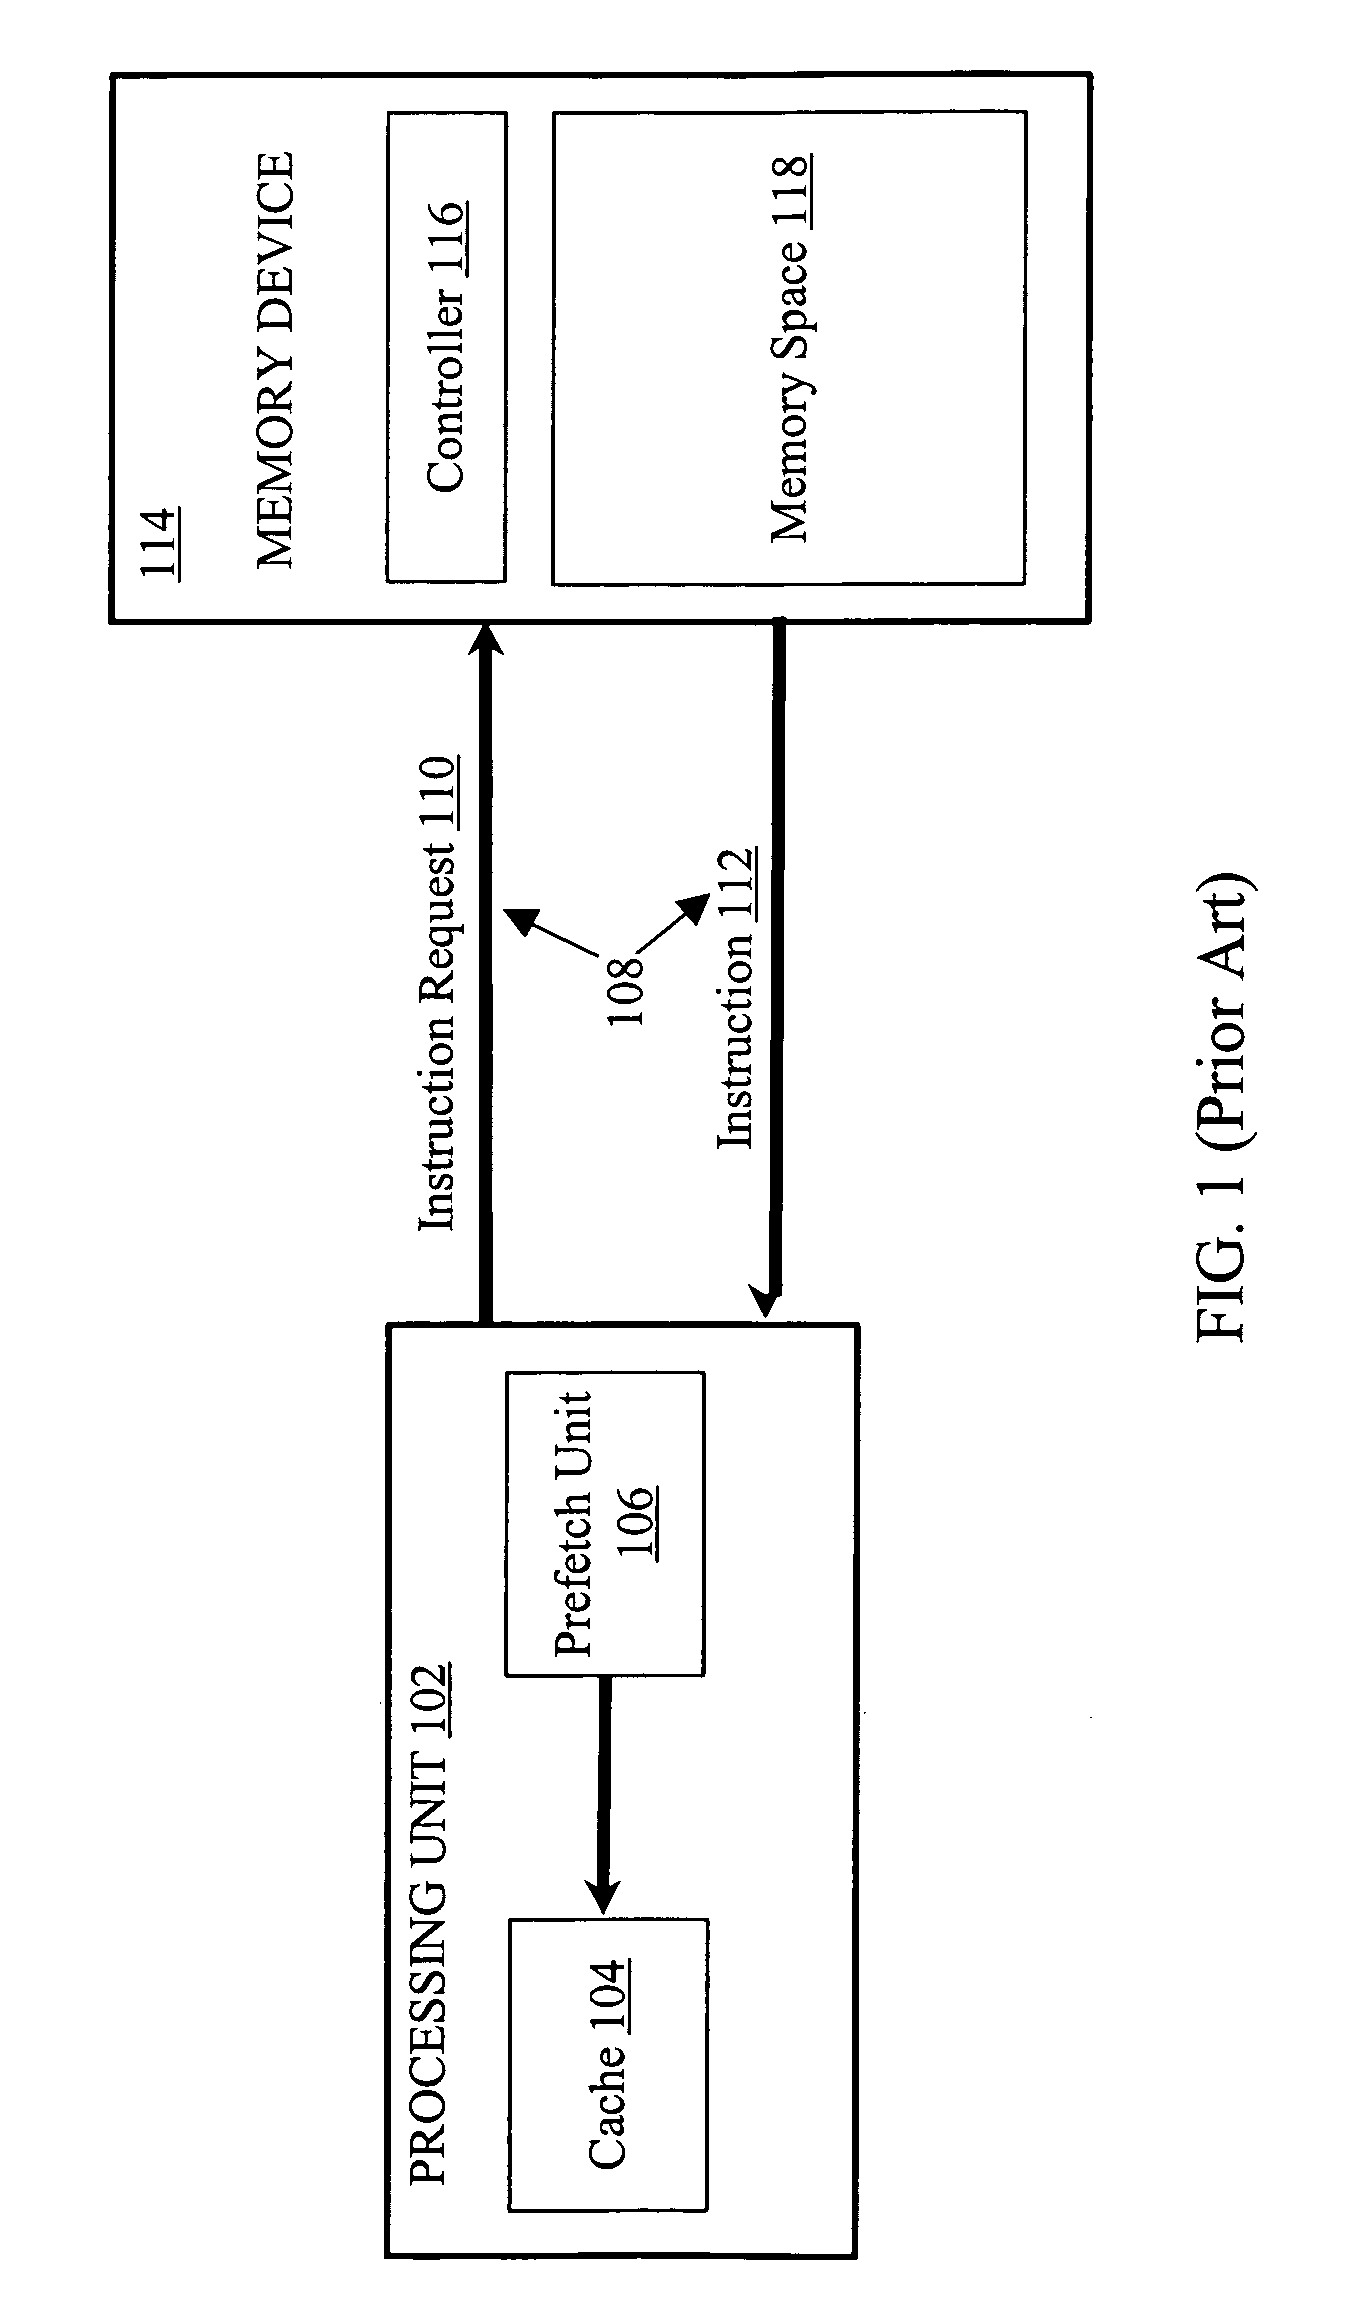 System, circuit, and method for adjusting the prefetch instruction rate of a prefetch unit